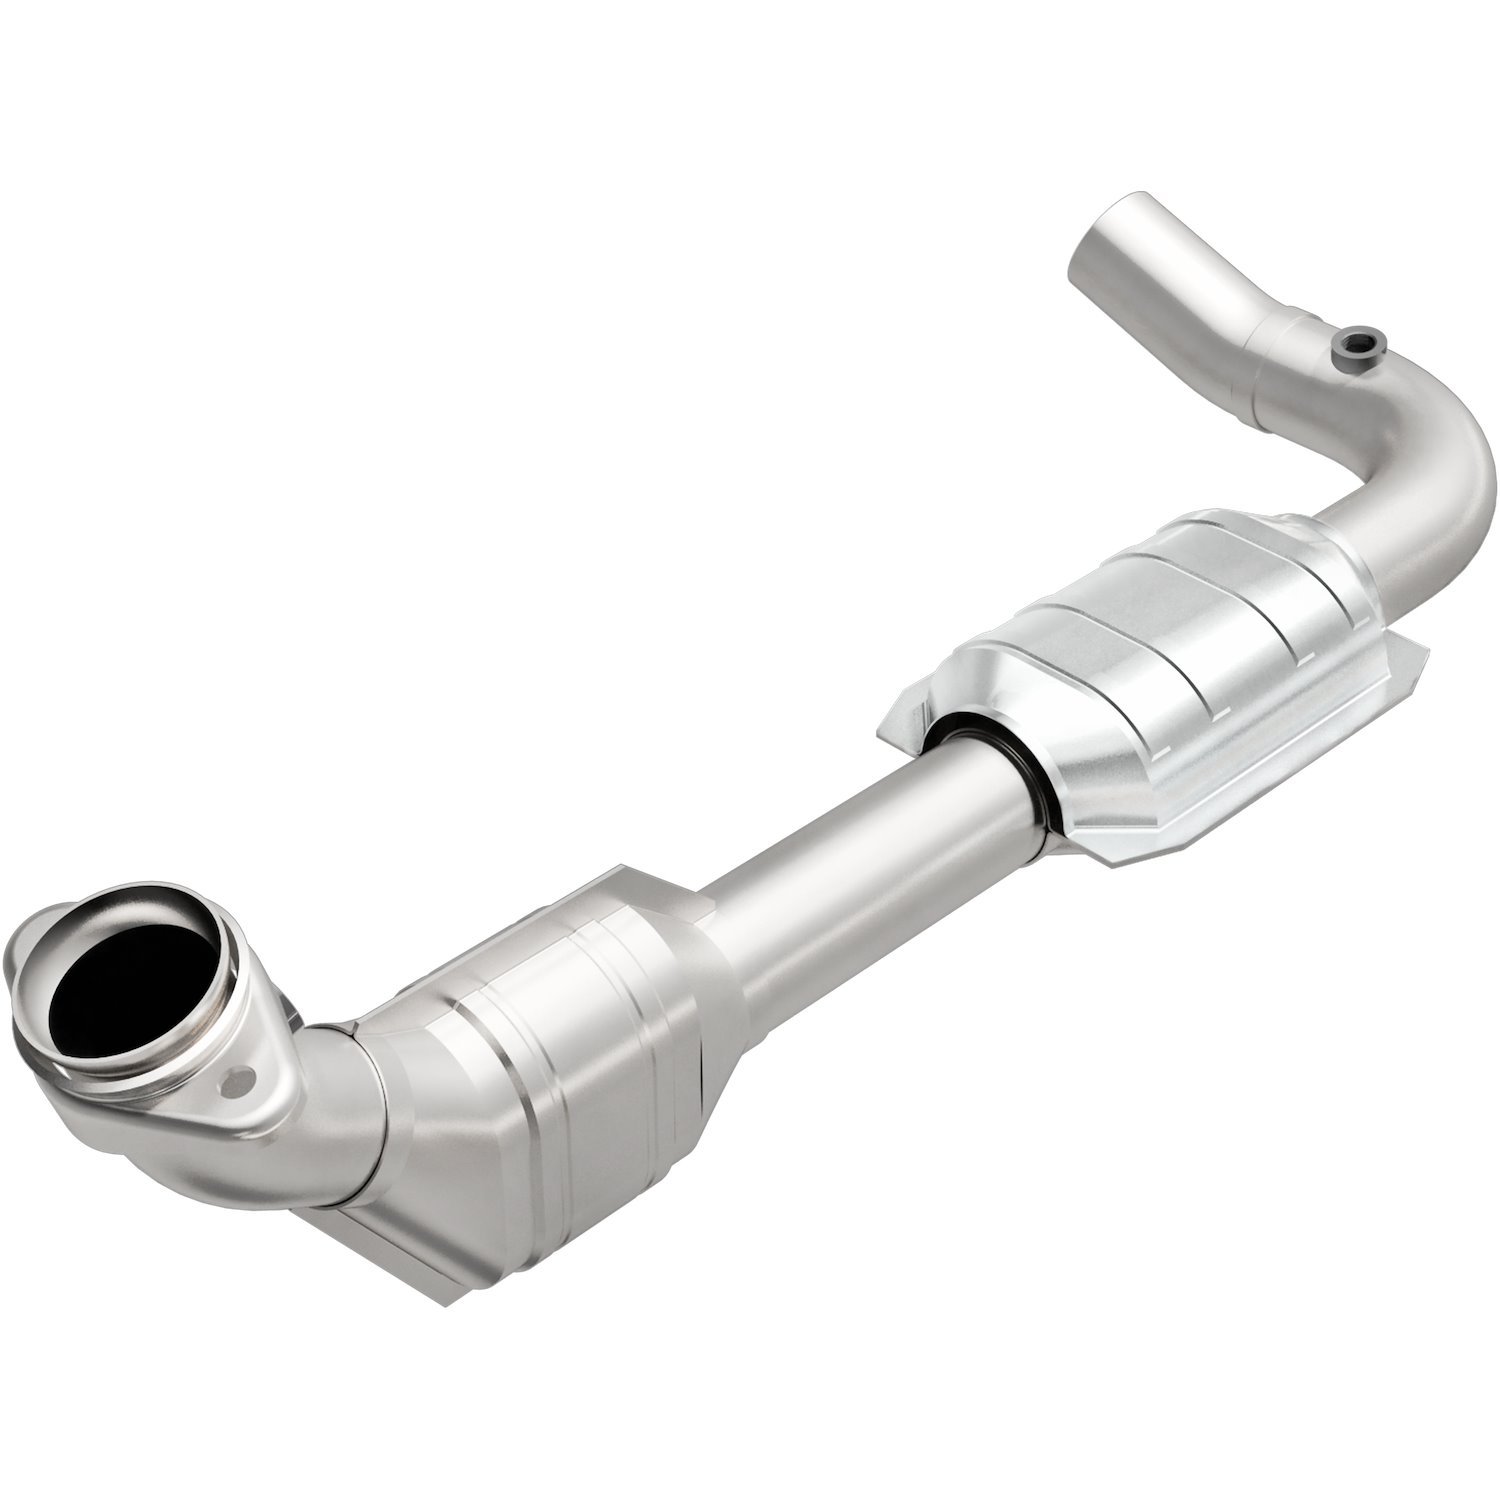 OEM Grade Federal / EPA Compliant Direct-Fit Catalytic Converter 51433